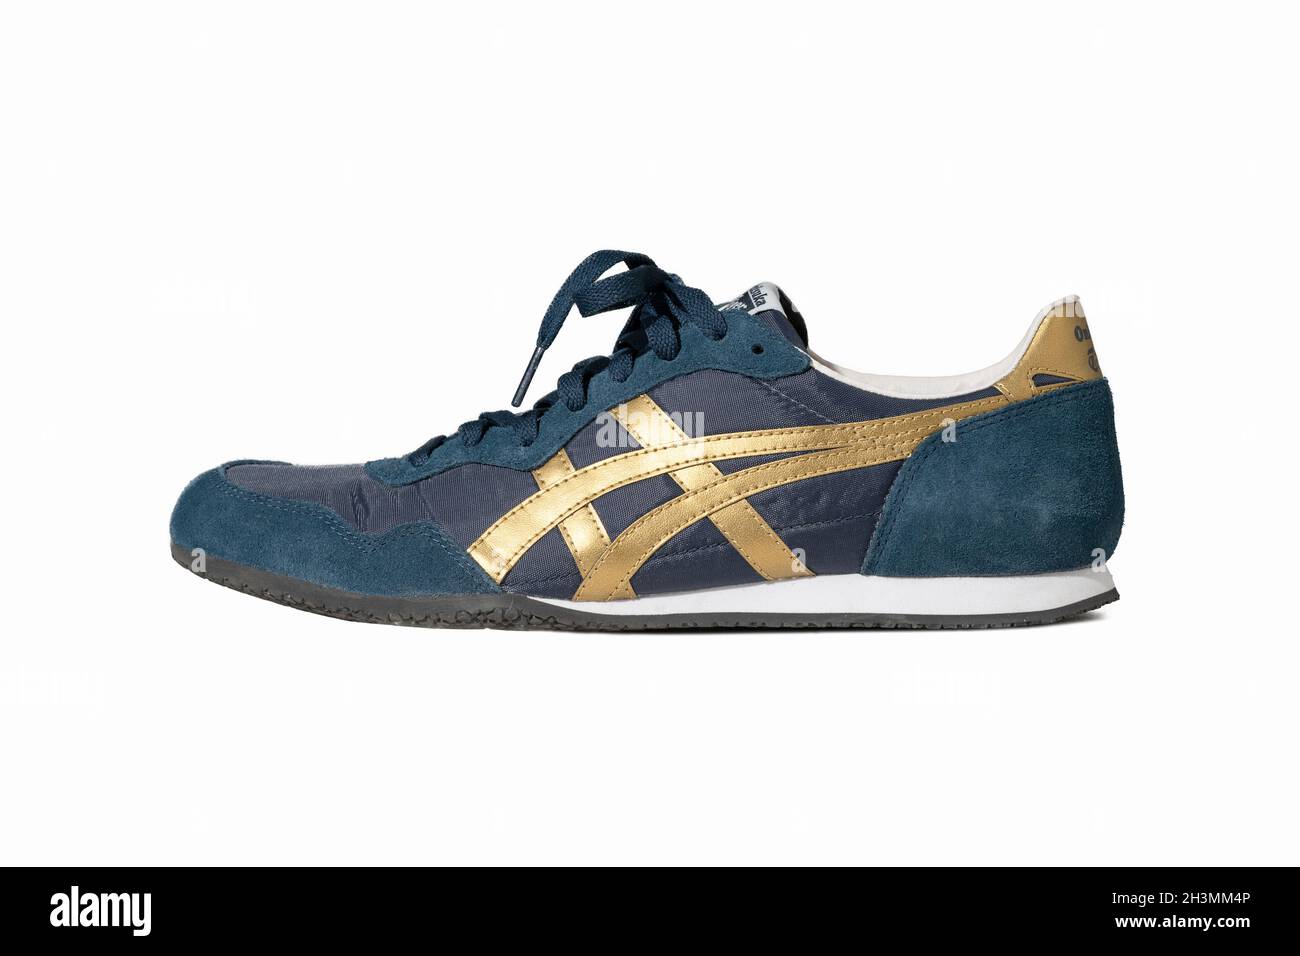 Blue sneakers of Asics brand. Stylish lace-up shoes for warm weather and a fitness hall. Blue suede shoes with gold accents cut Stock Photo